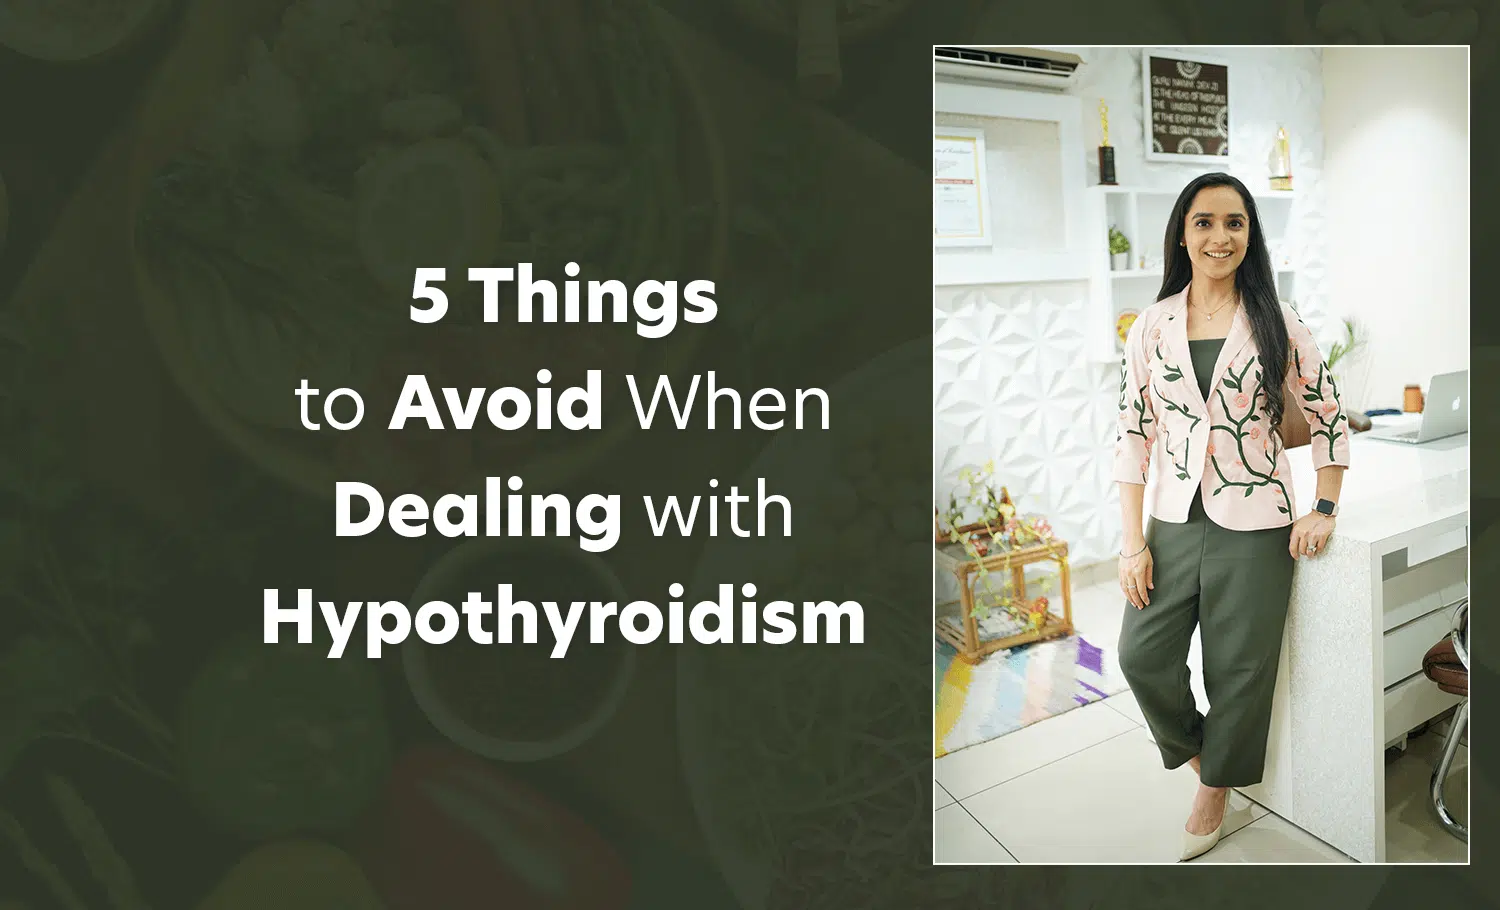 5 Things to Avoid When Dealing with Hypothyroidism by Dietitian Lavleen